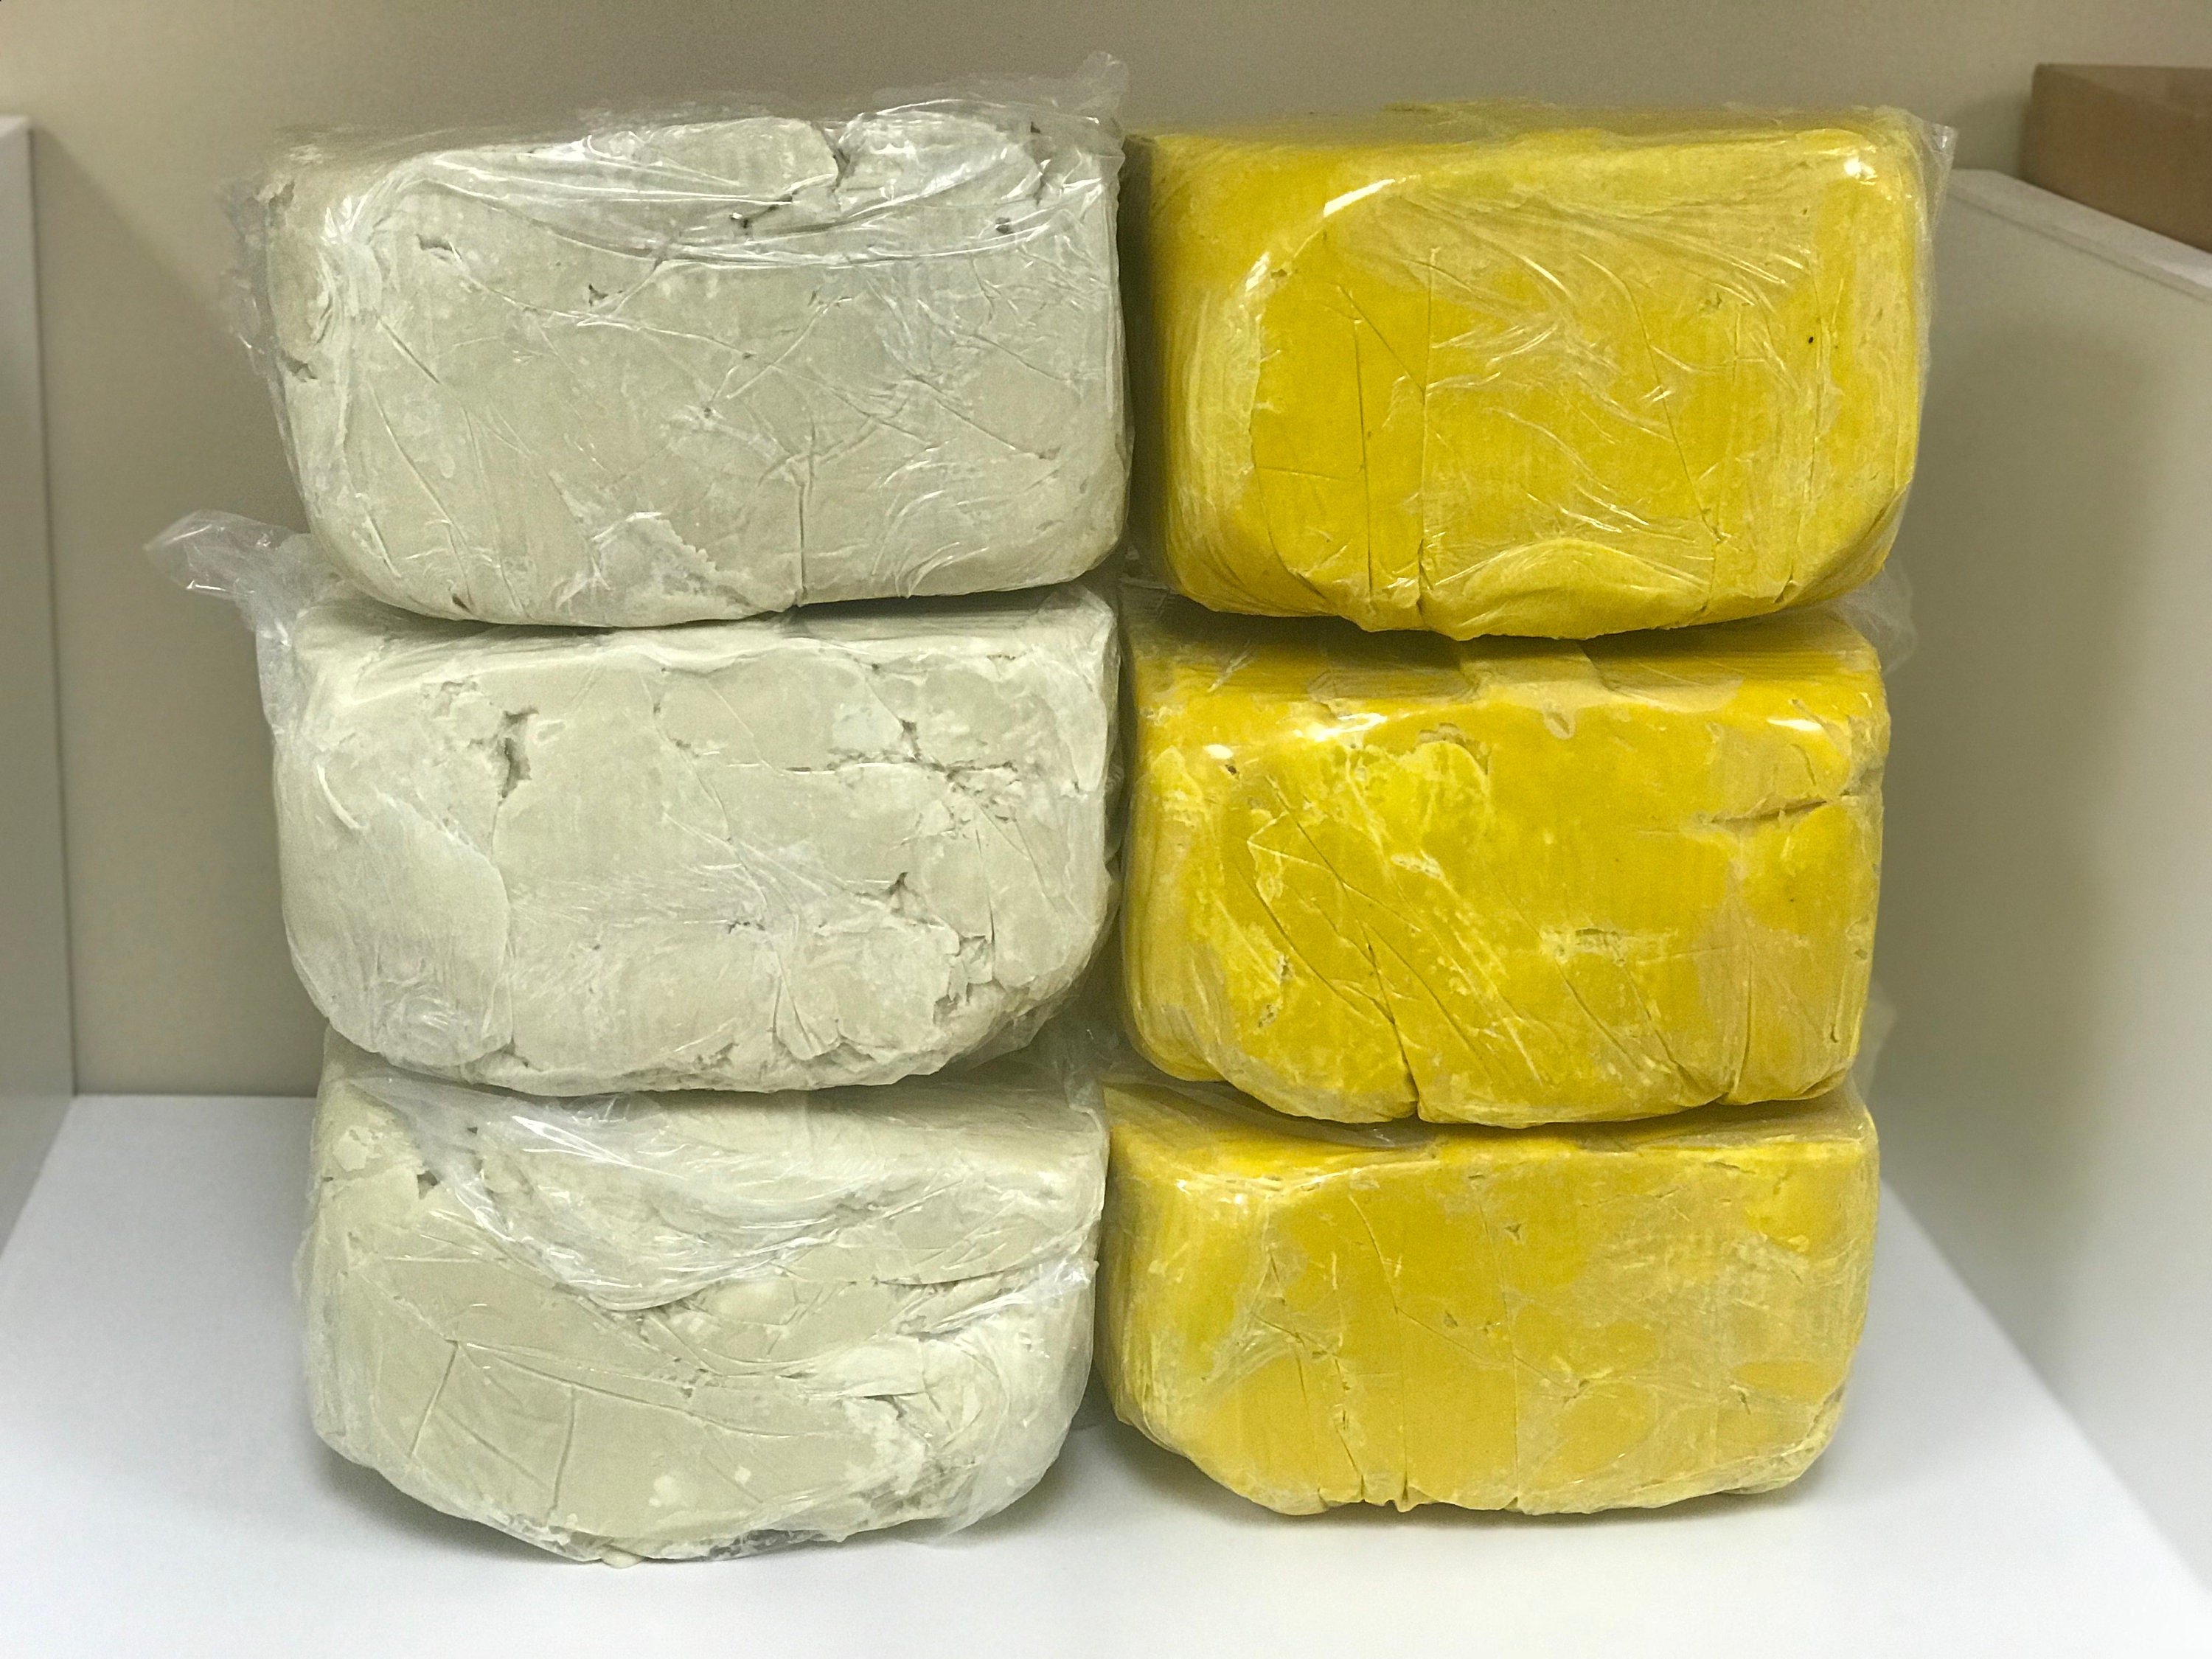 South Beach Crafts 100% Raw Unrefined Shea Butter African Grade A 5 Pound  (80 oz) for Shea Creams, Soap Making, Skin, Hair and More (5 Pound)